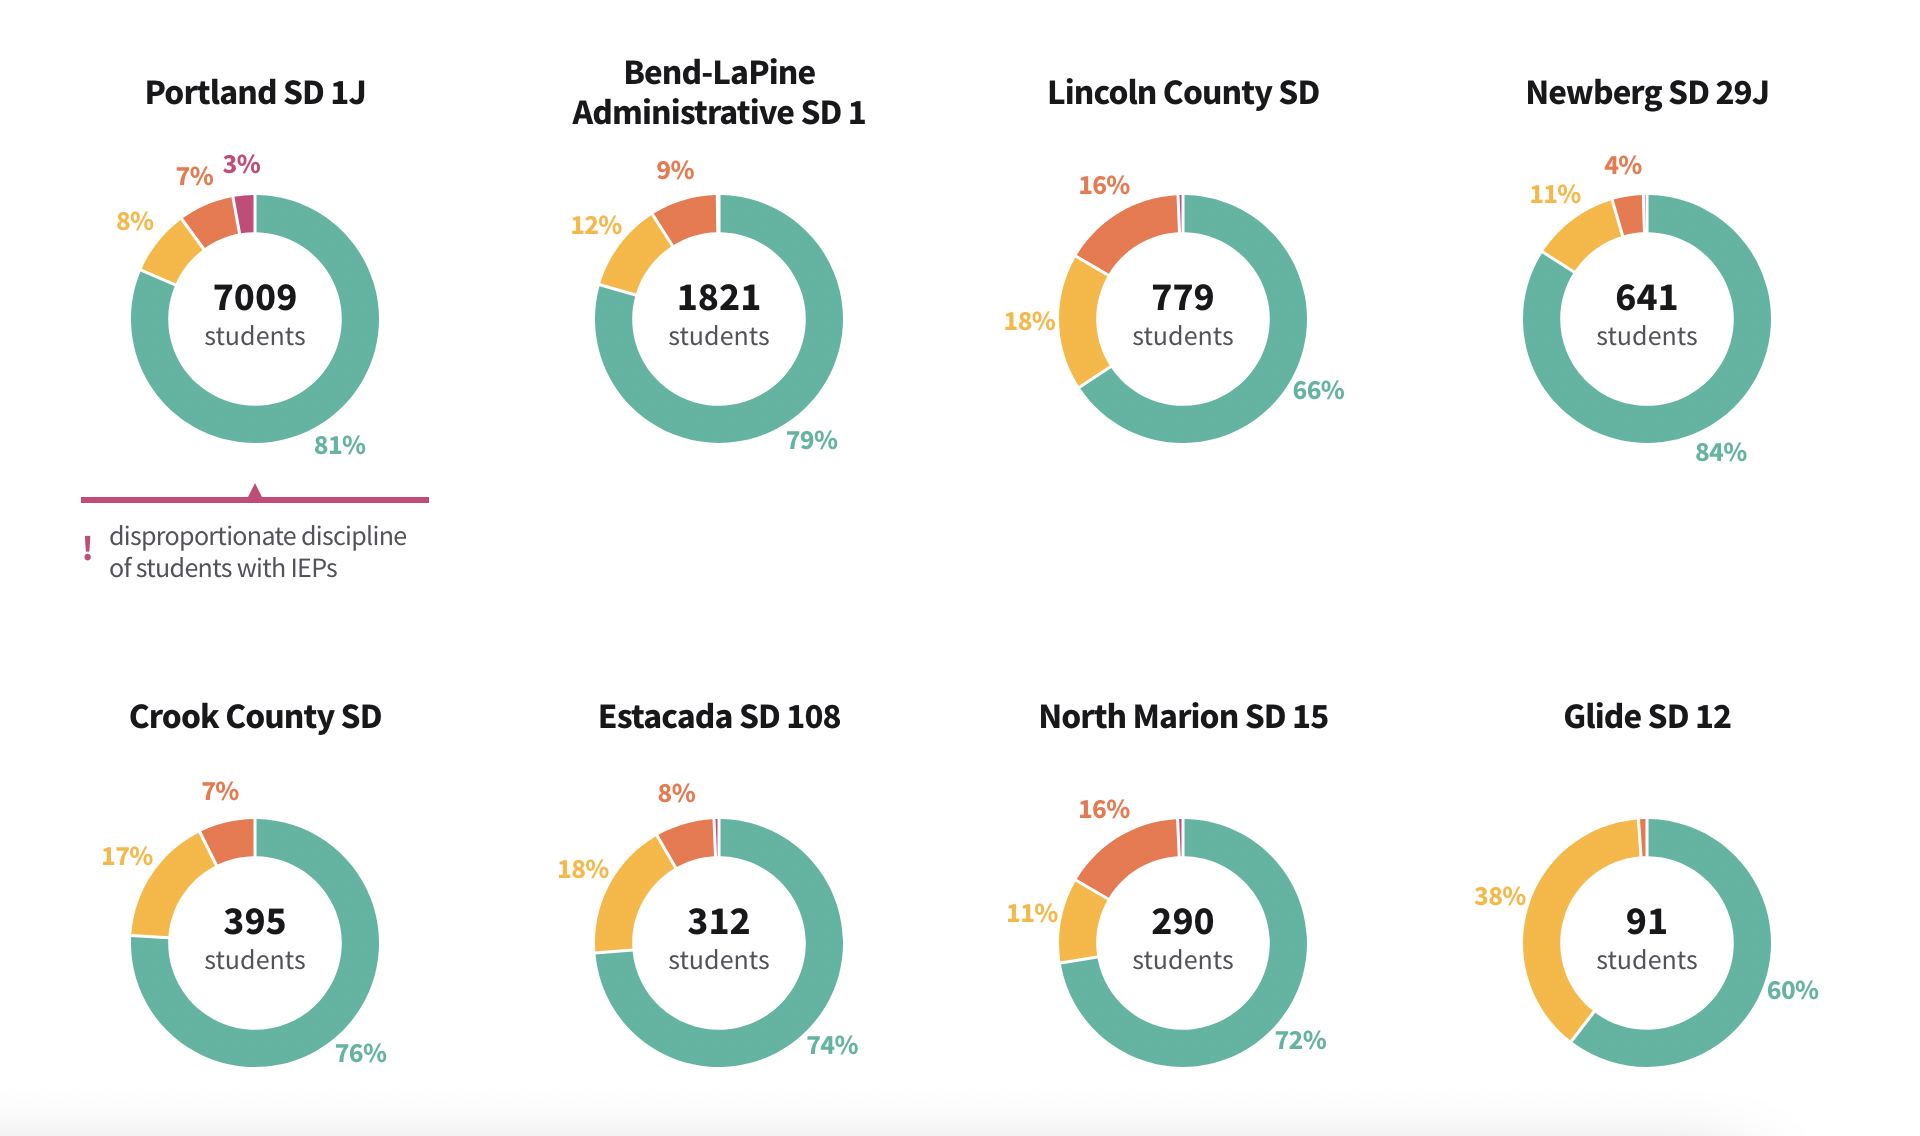 Donut charts with hues of teal, yellow, orange, and red-pink showing the inclusion rates of several school districts